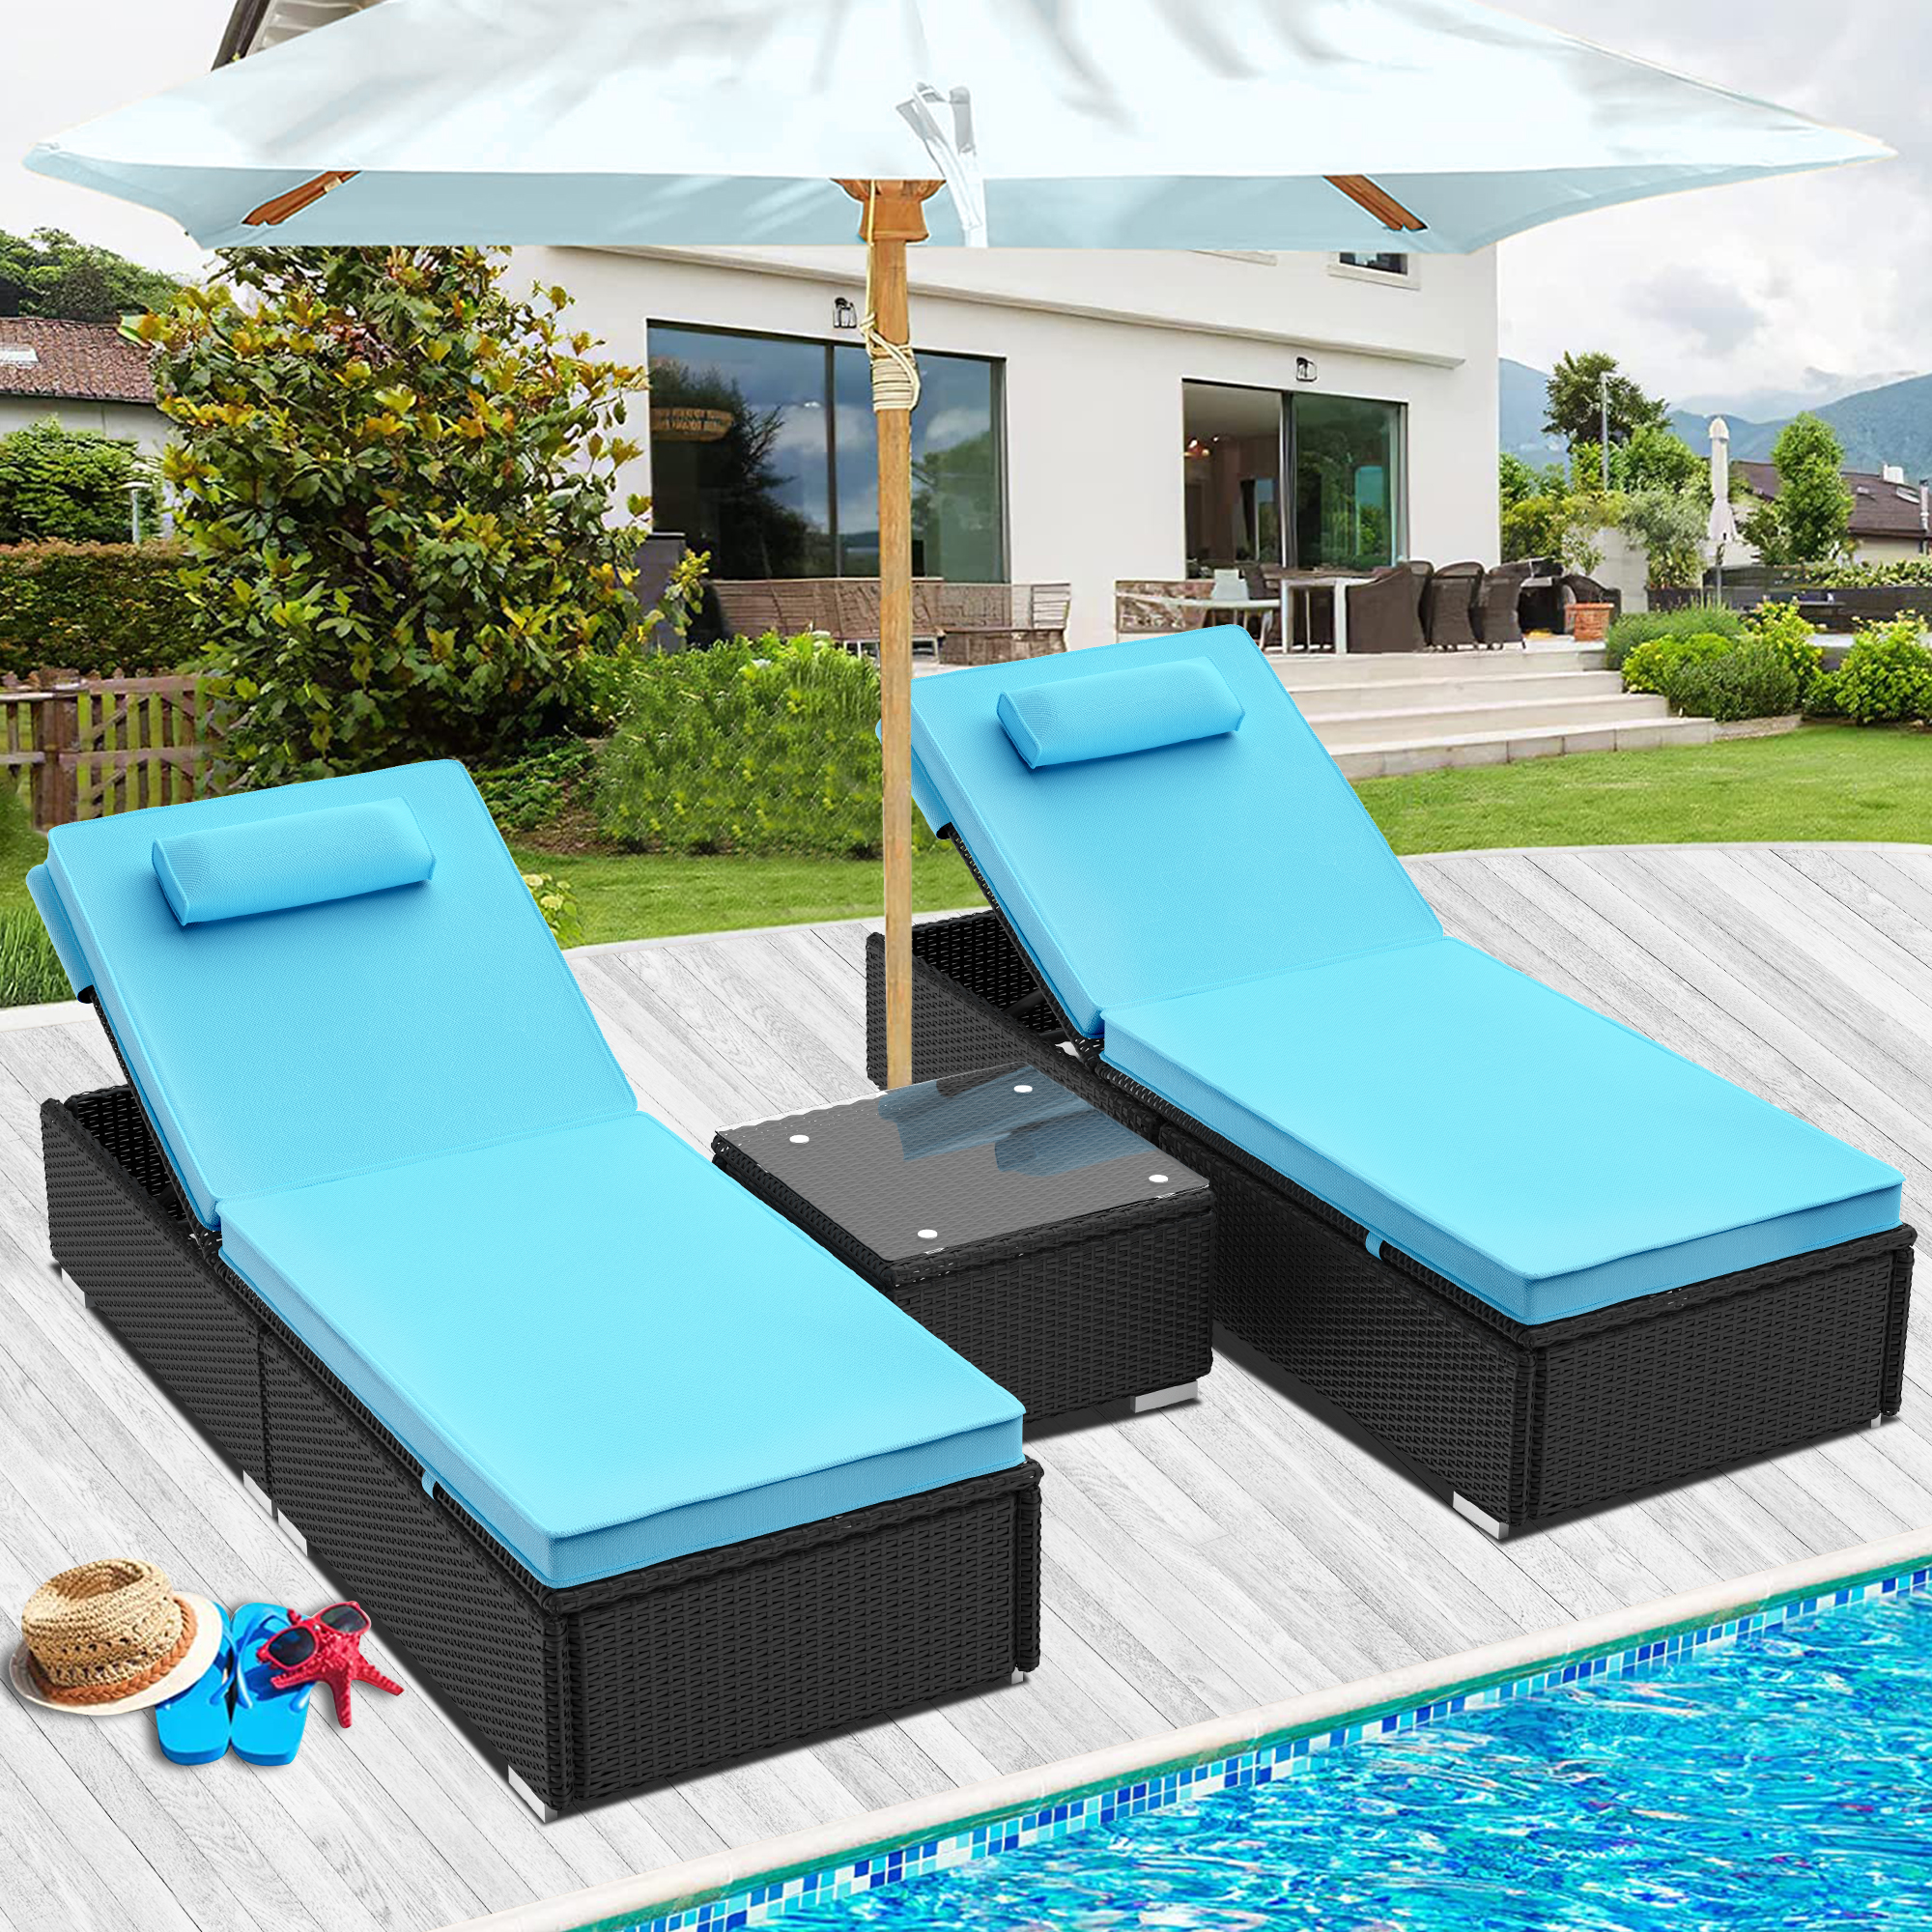 SESSLIFE Chaise Lounge Chair for Outside, Rattan Wicker Outdoor Lounge Chair, Adjustable Pool Lounge Chair with Side Table & Thickened Cushion for Patio Poolside Deck - image 2 of 8